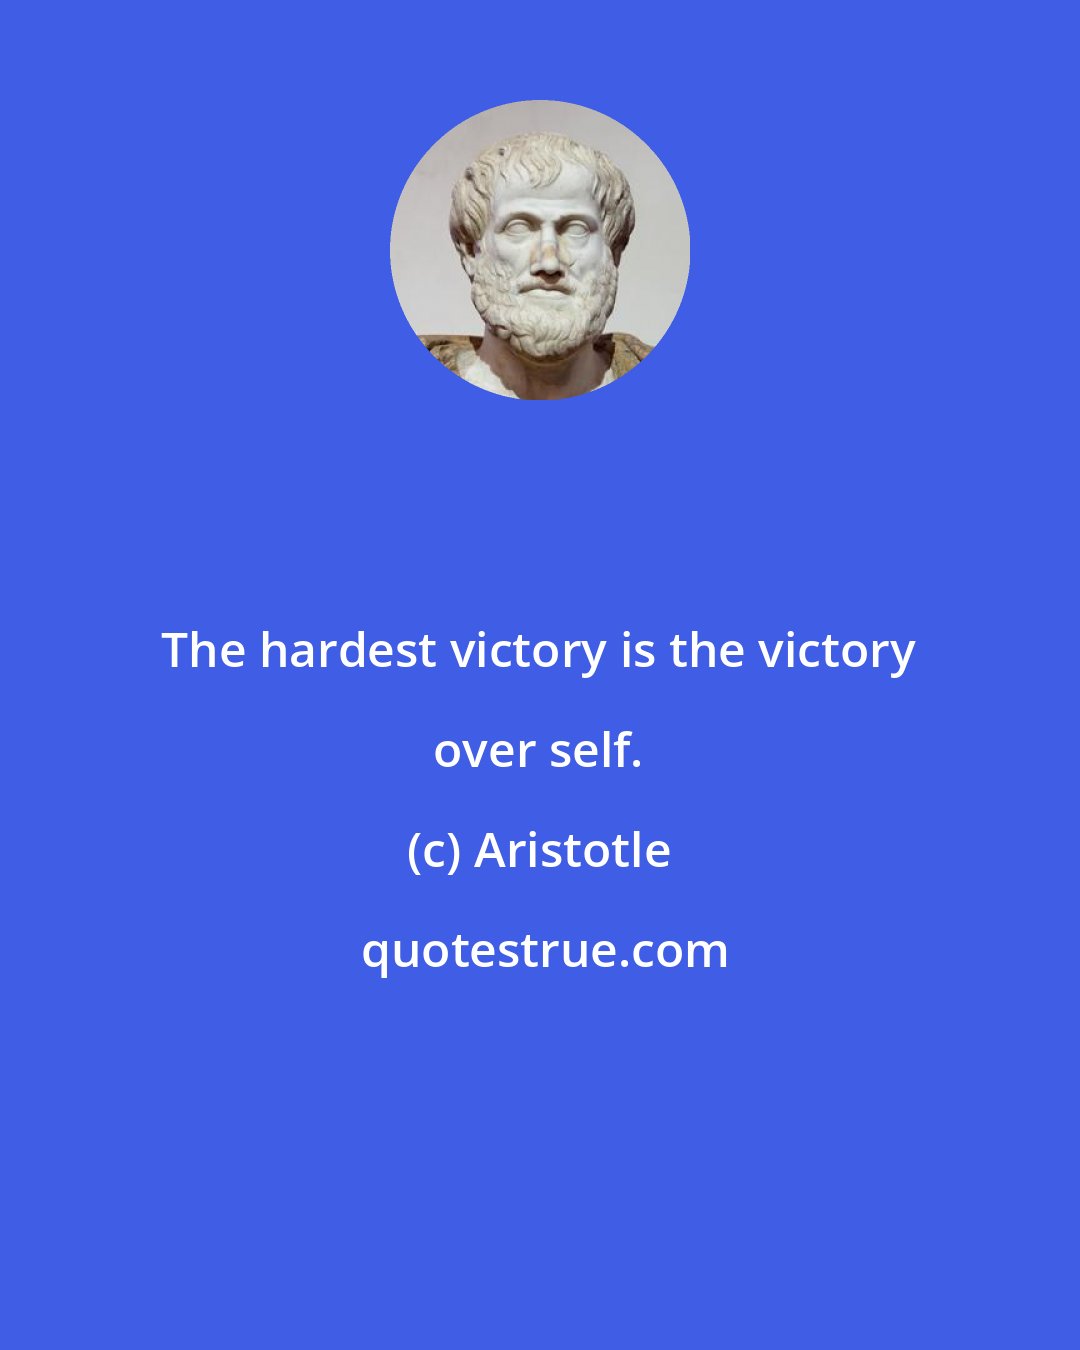 Aristotle: The hardest victory is the victory over self.